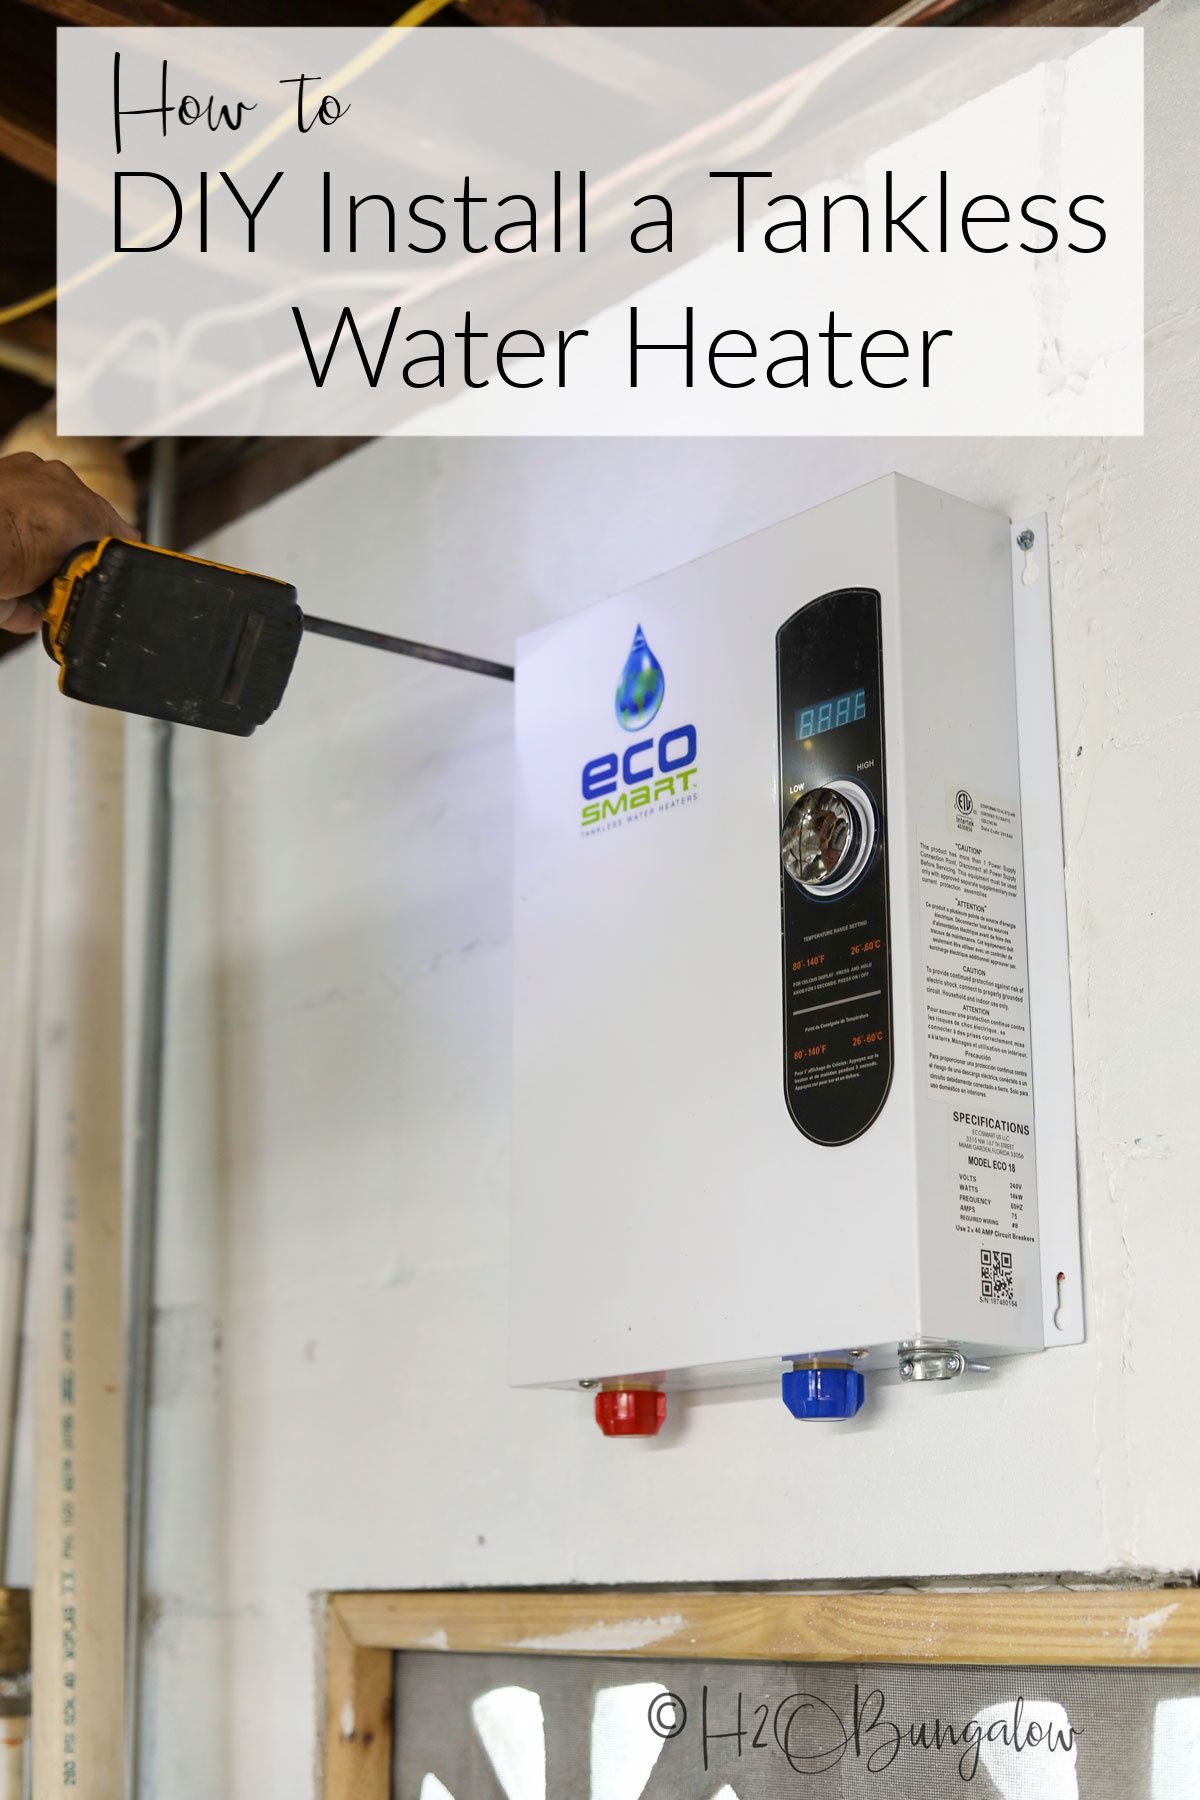 How To Install A Tankless Water Heater Water Heater Diy Water